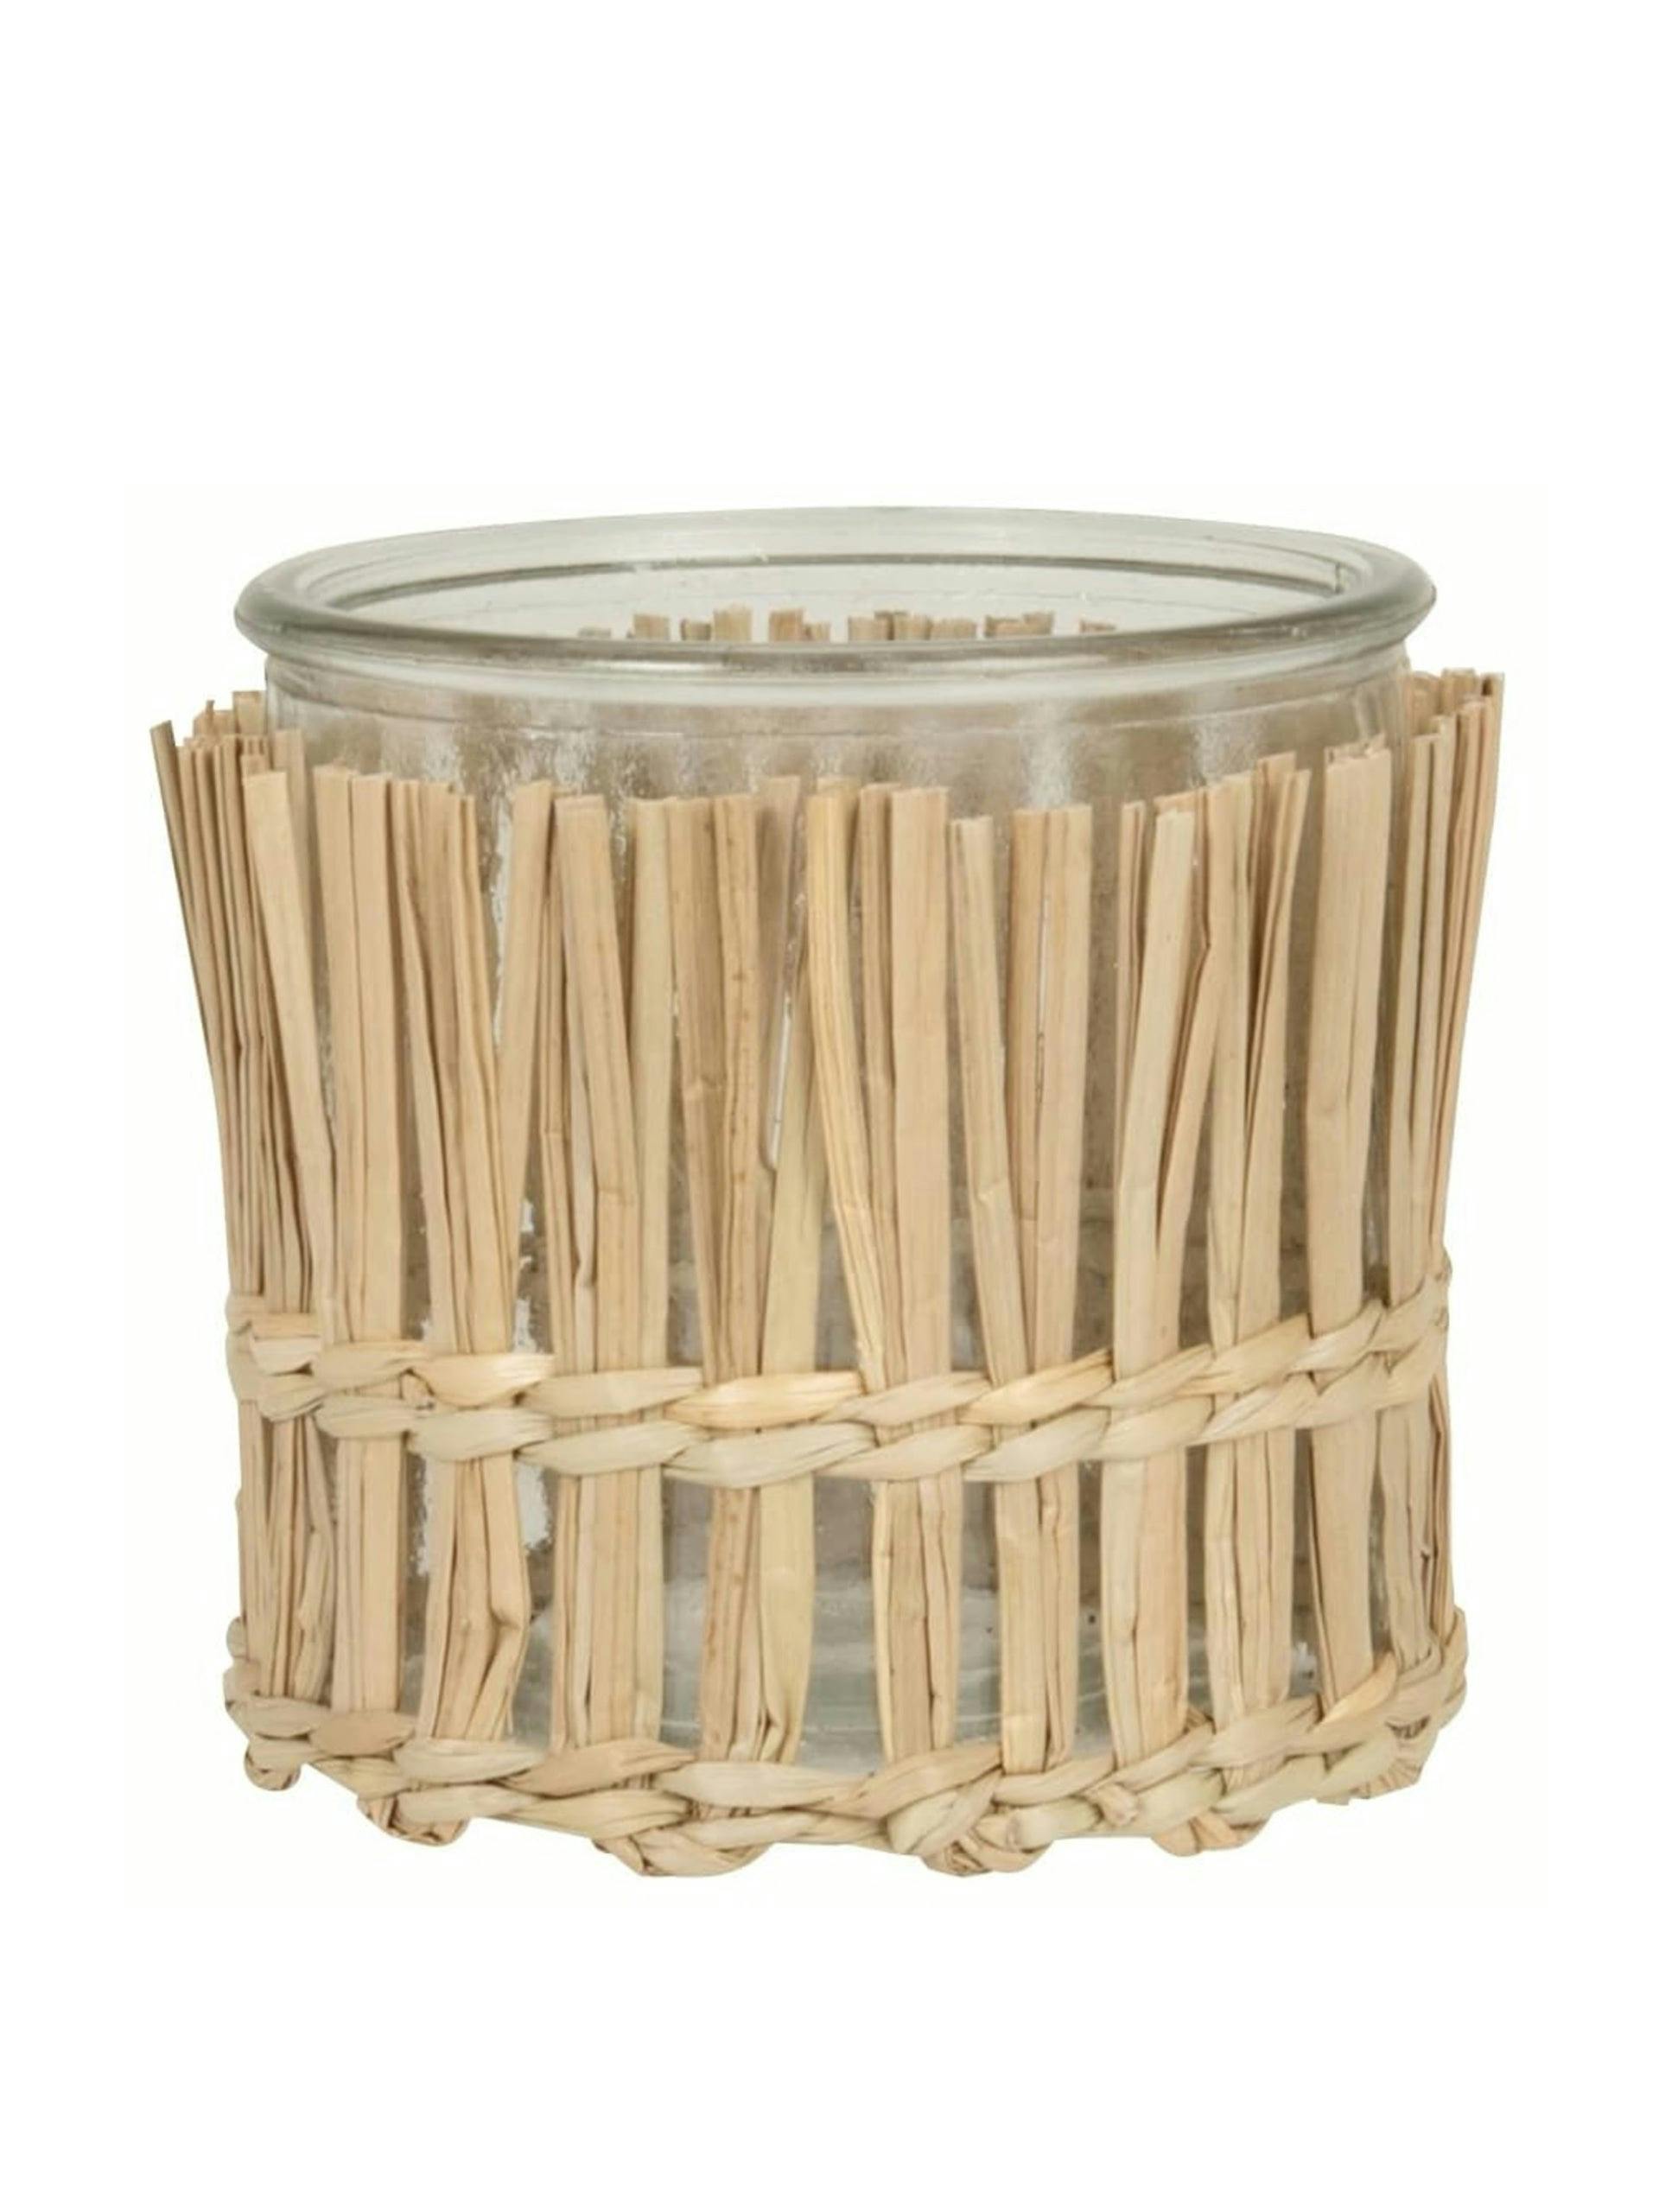 Hand-woven straw and glass tealight holder